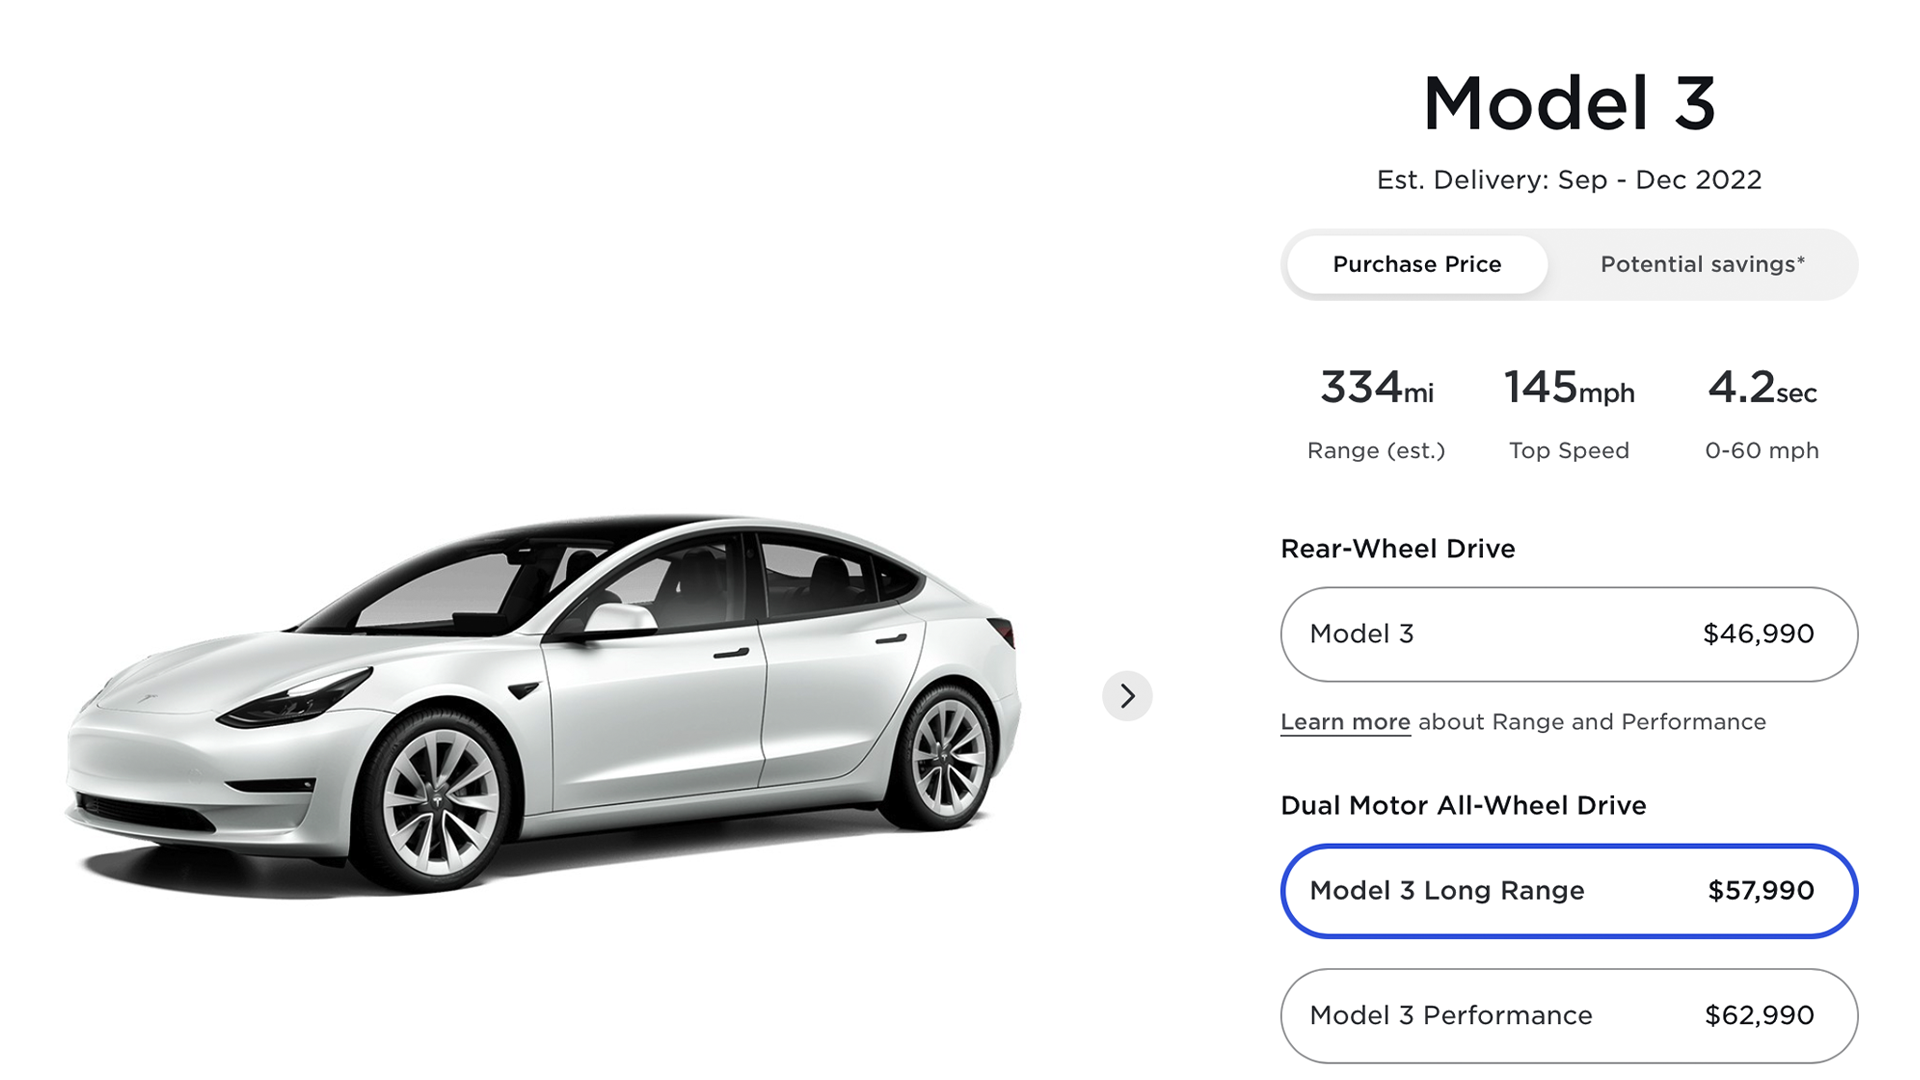 The Model 3 sales page.